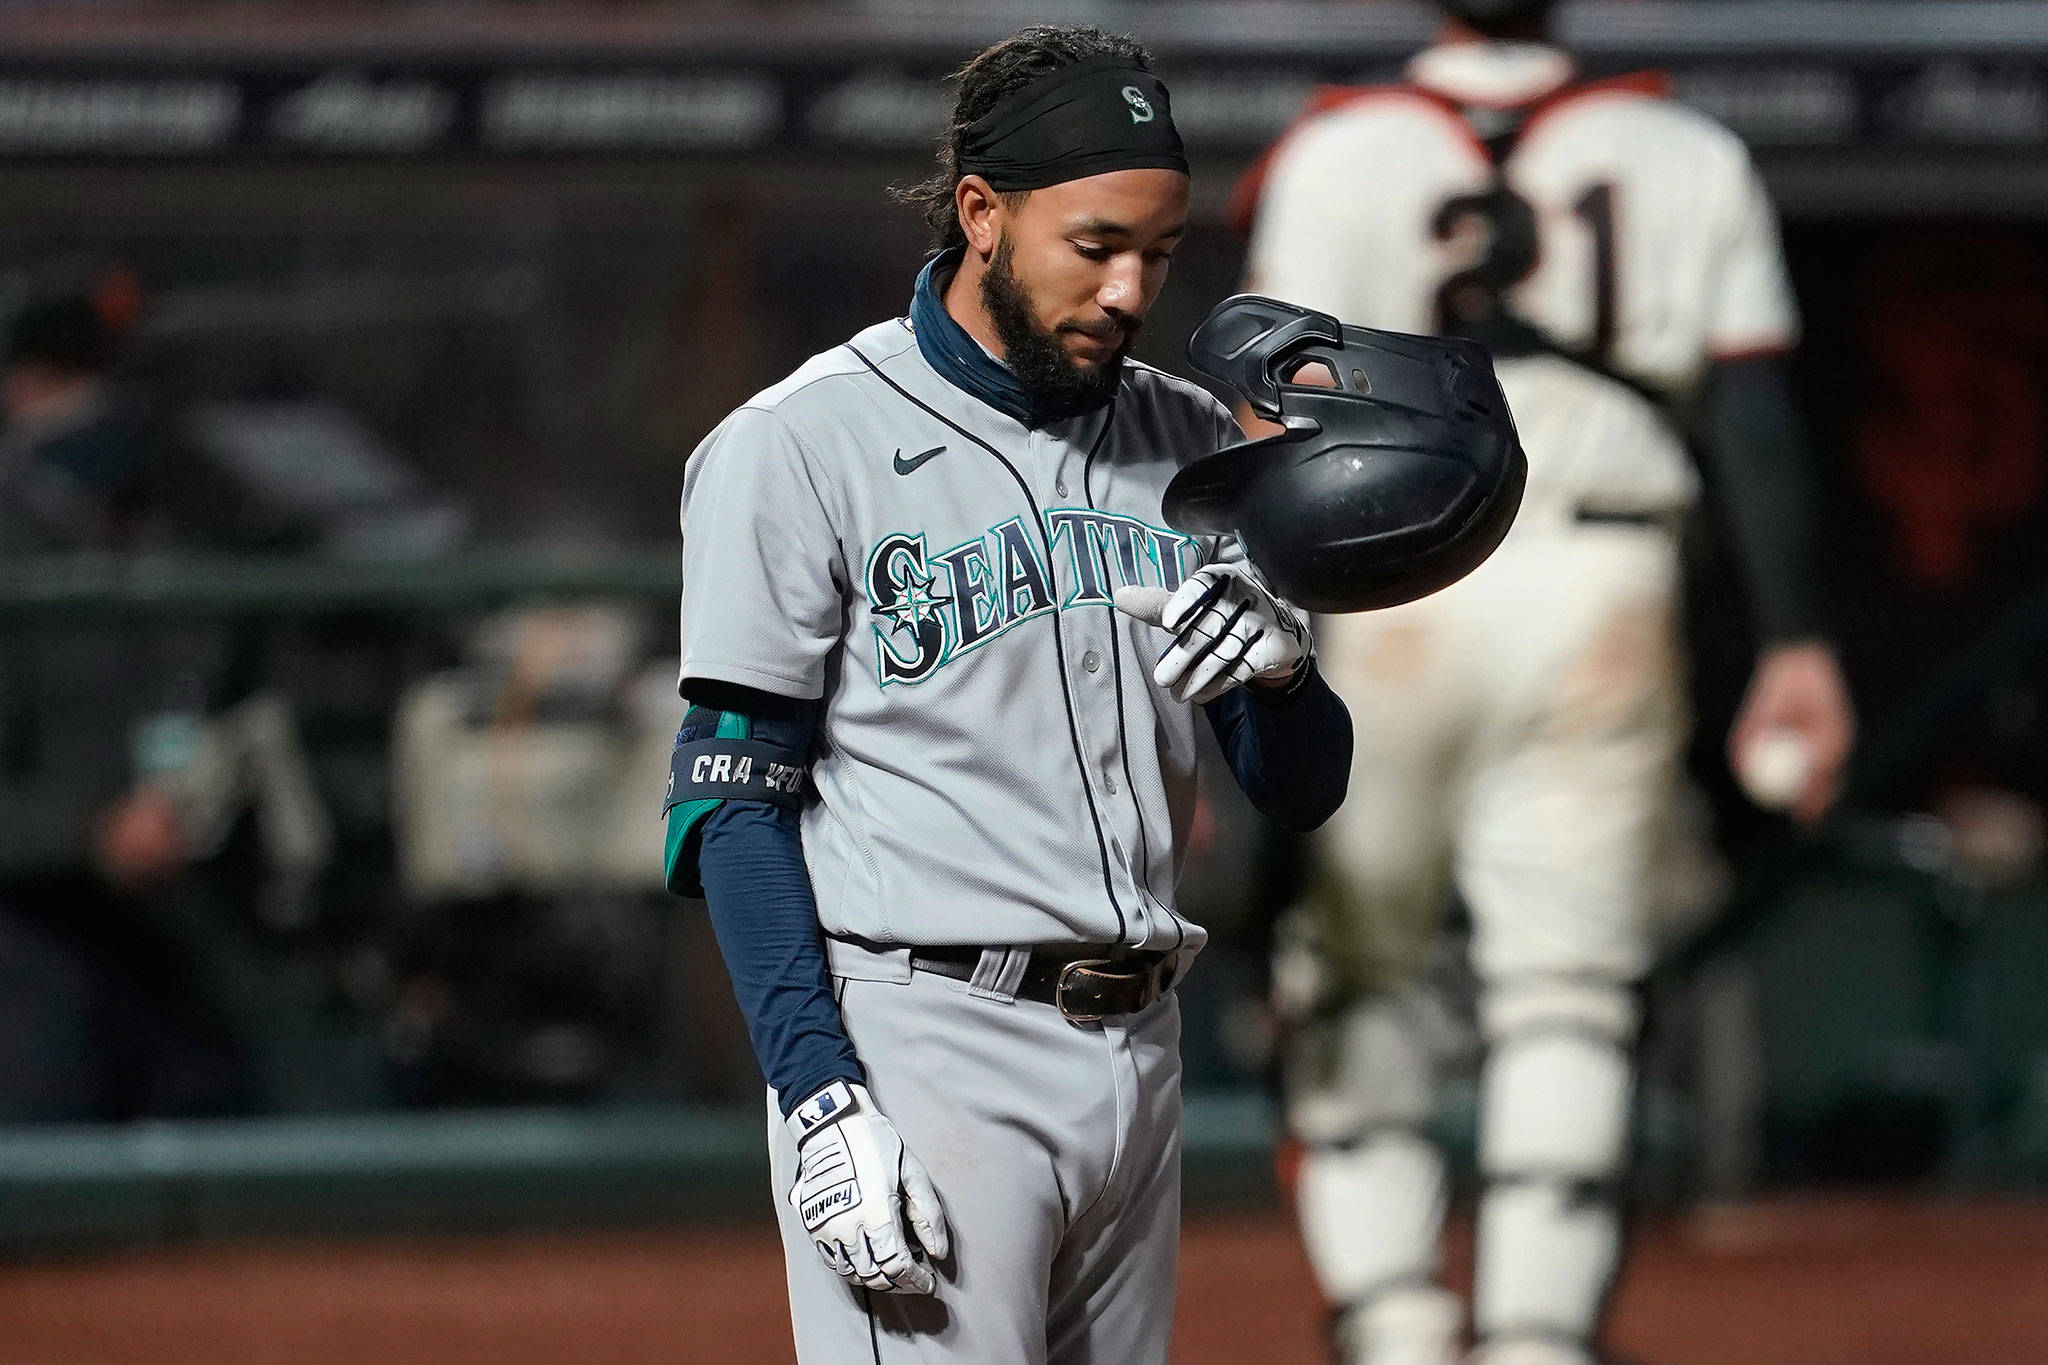 The Mariners’ J.P. Crawford tosses his helmet after striking out during the sixth inning of a game against the Giants on Sept. 16, 2020, in San Francisco. (AP Photo/Jeff Chiu)